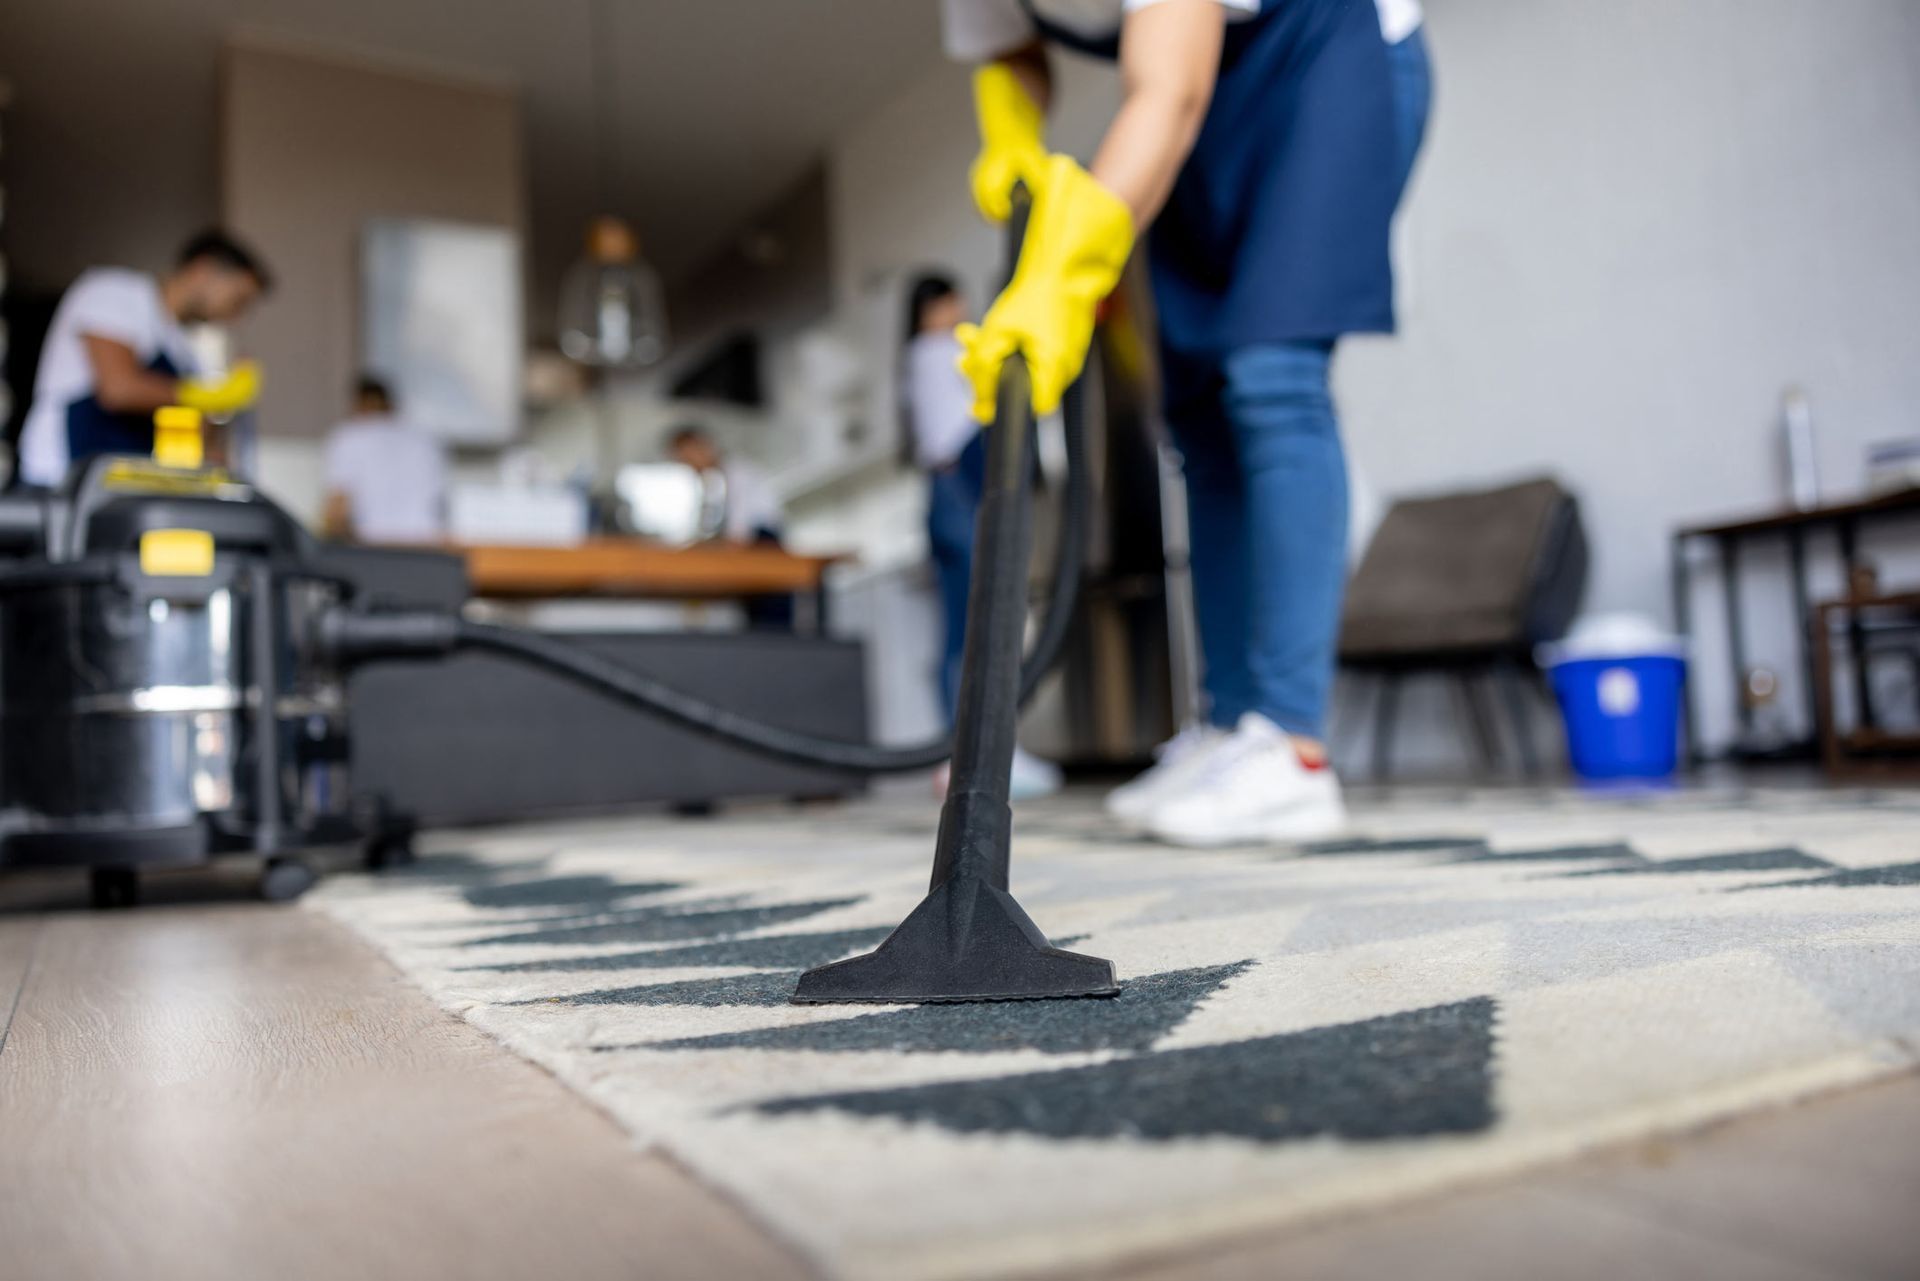 Professional Cleaner Vacuuming A Carpet — Appleton, WI — Confident Cleaners LLC